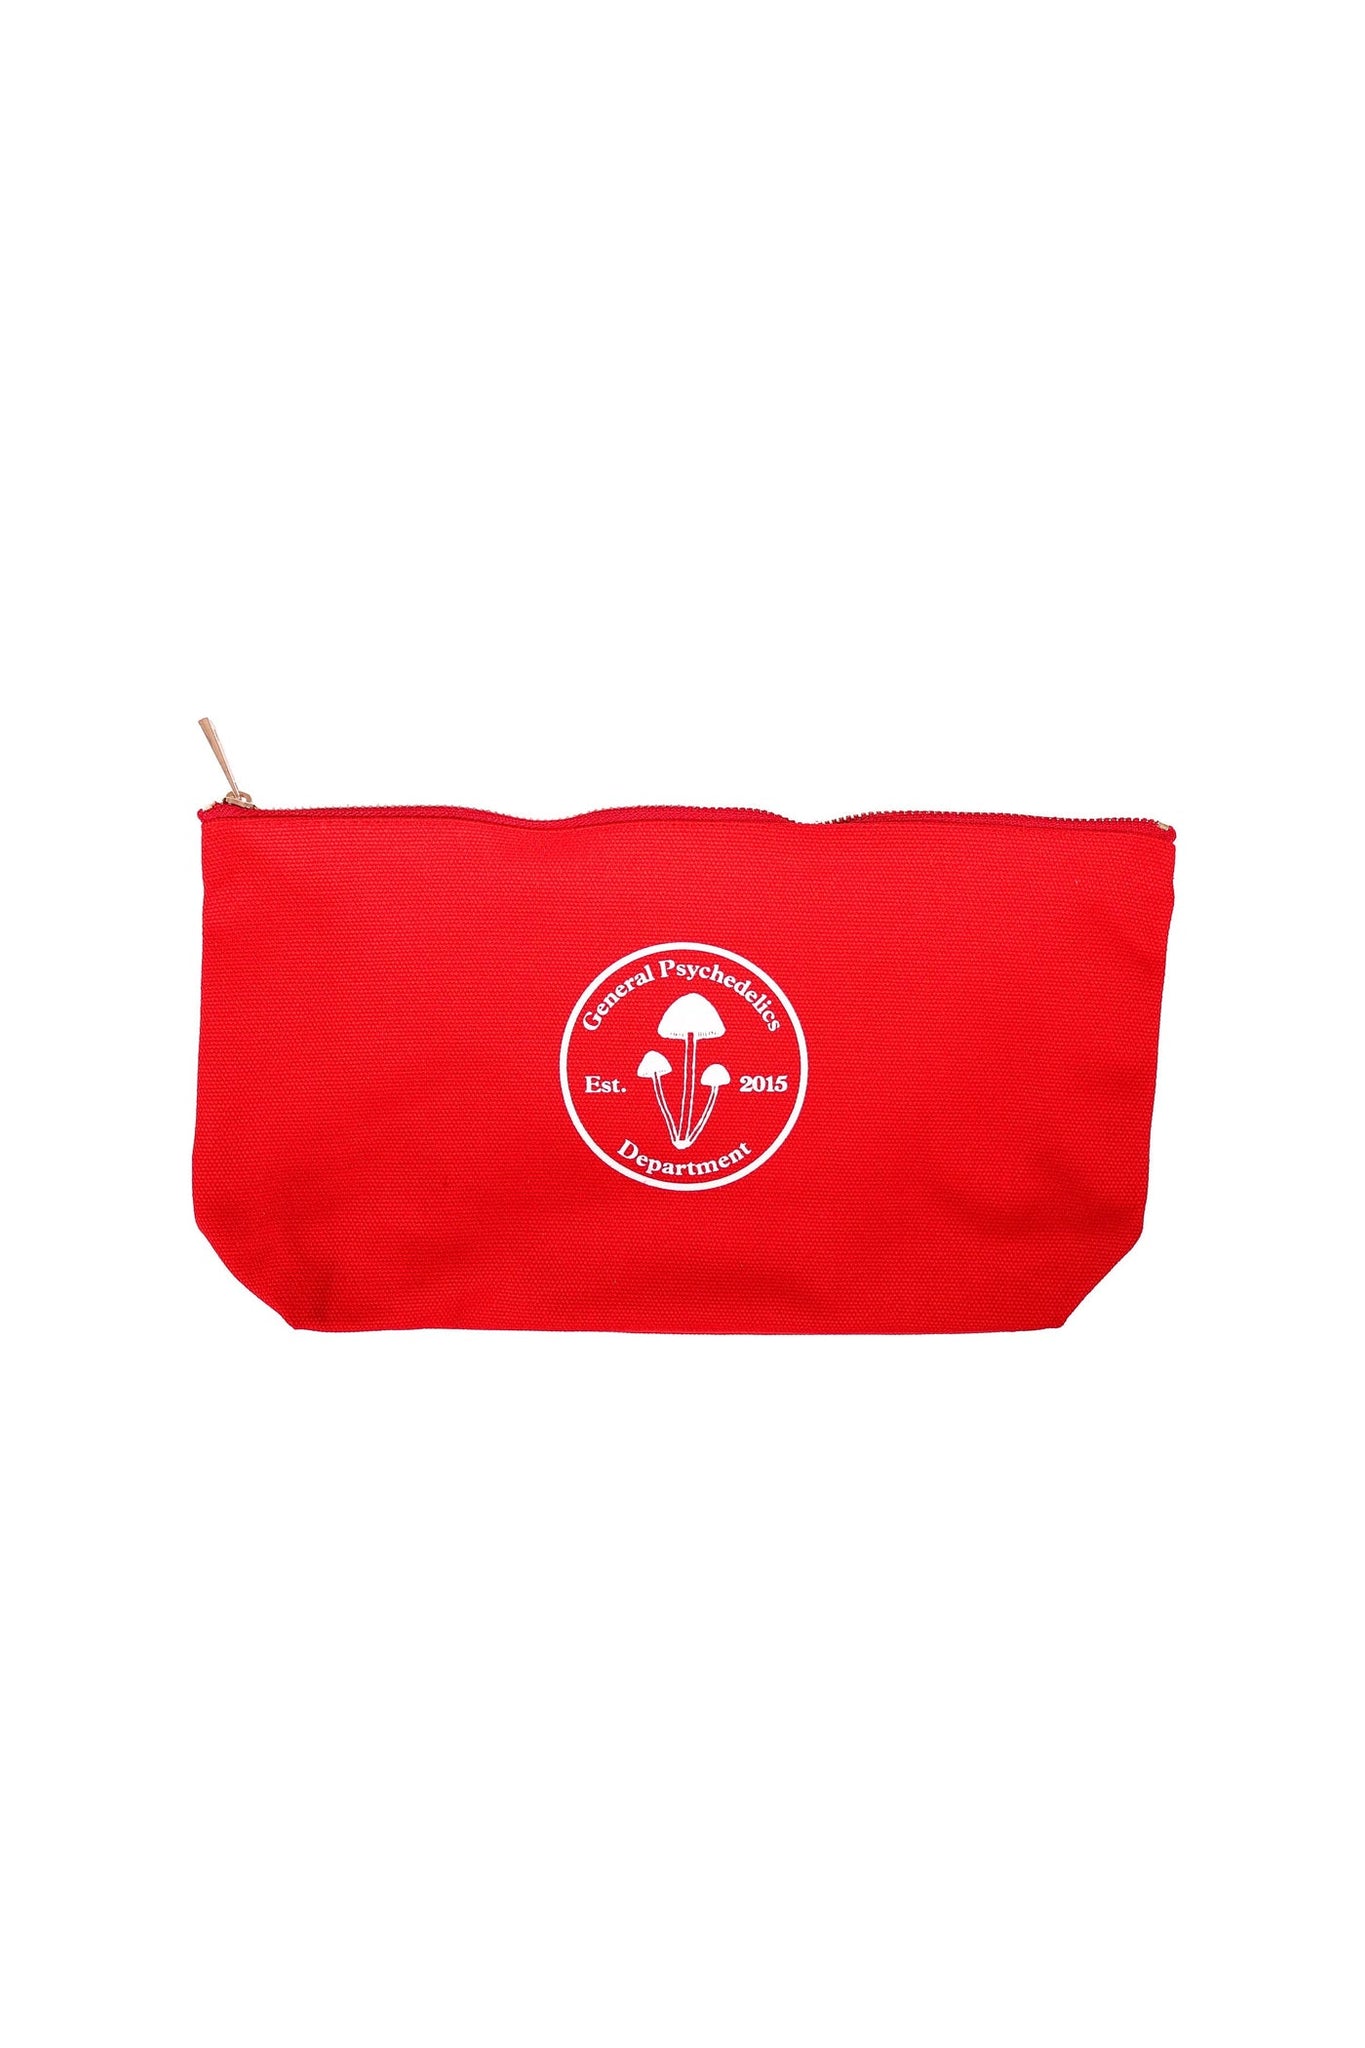 General Psychedelic Department Tool  Bag - Red